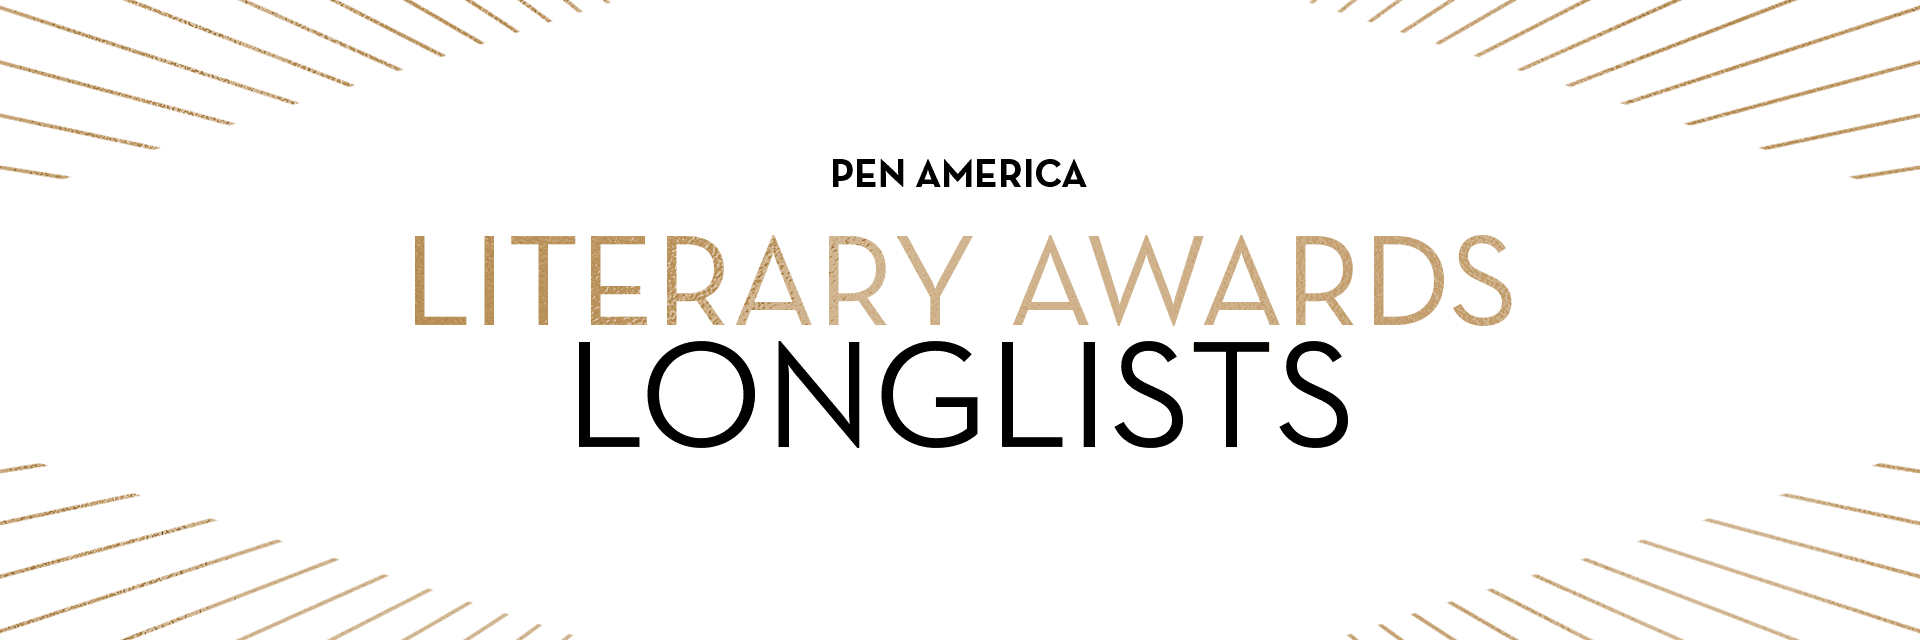 “PEN America Literary Award Longlists” in centered text; golden rays sticking out from each corner